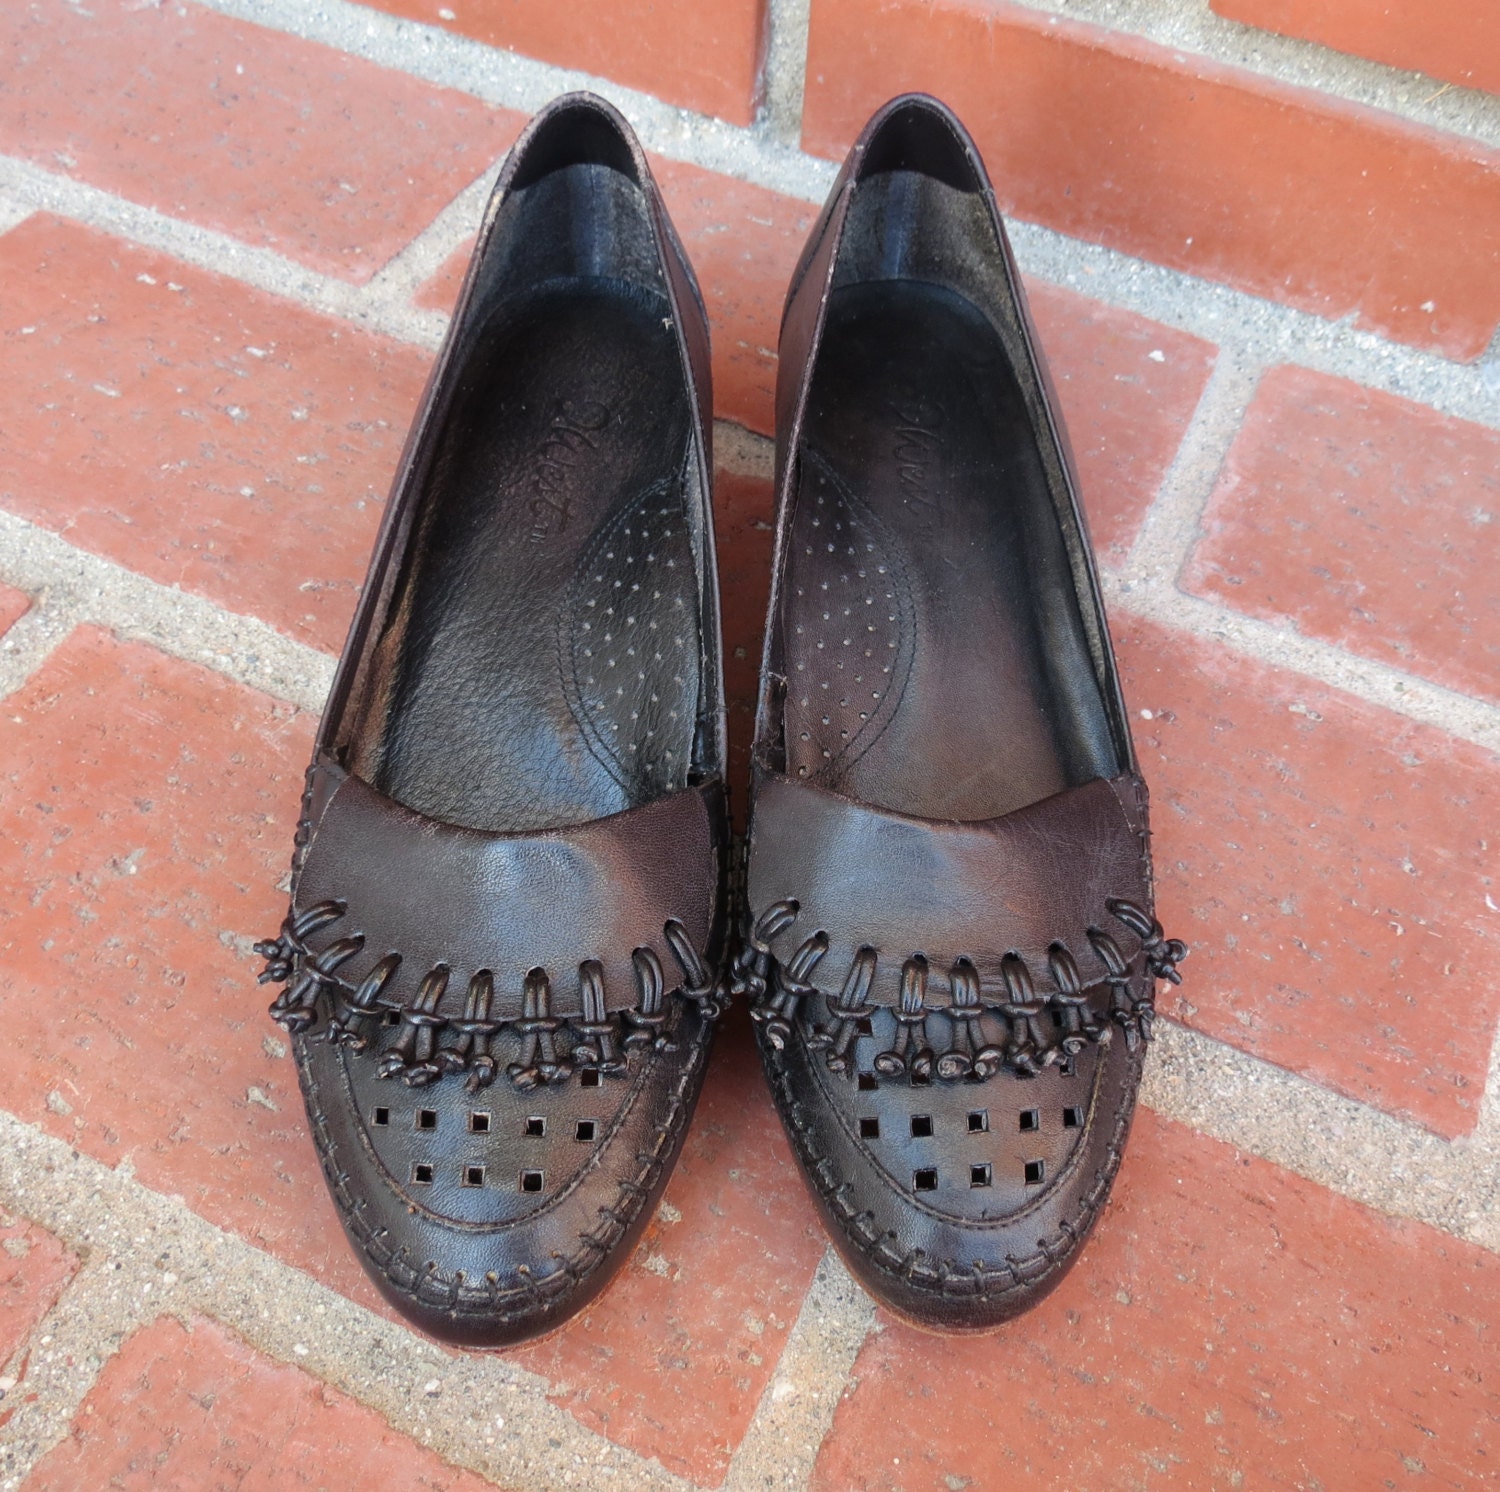 Wedge Moccasin Loafers Black Leather Flats by GoodLuxeVintage